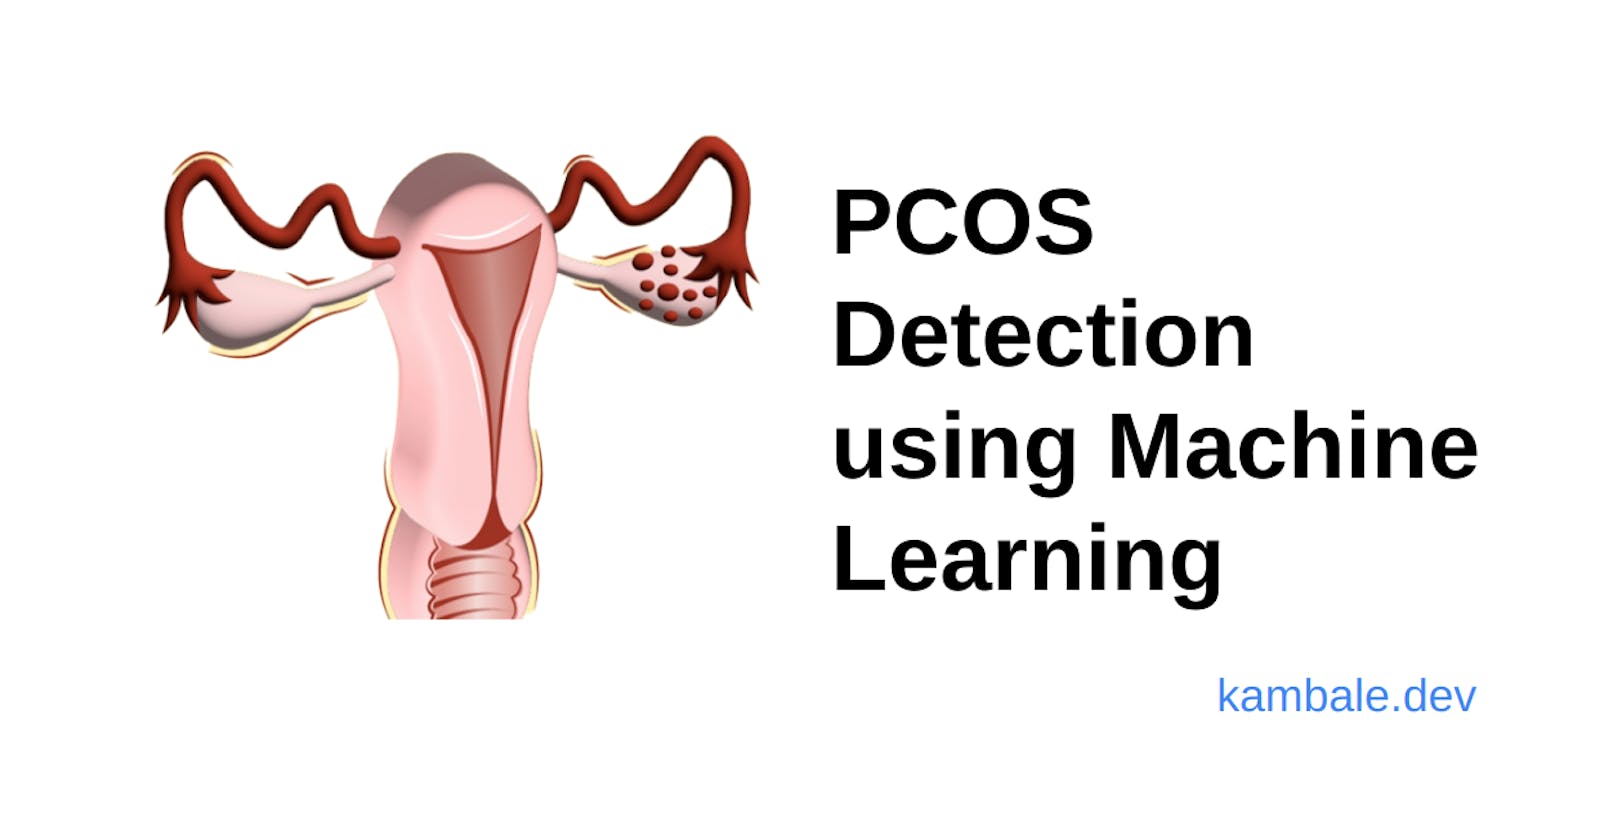 PCOS Detection Using Machine Learning